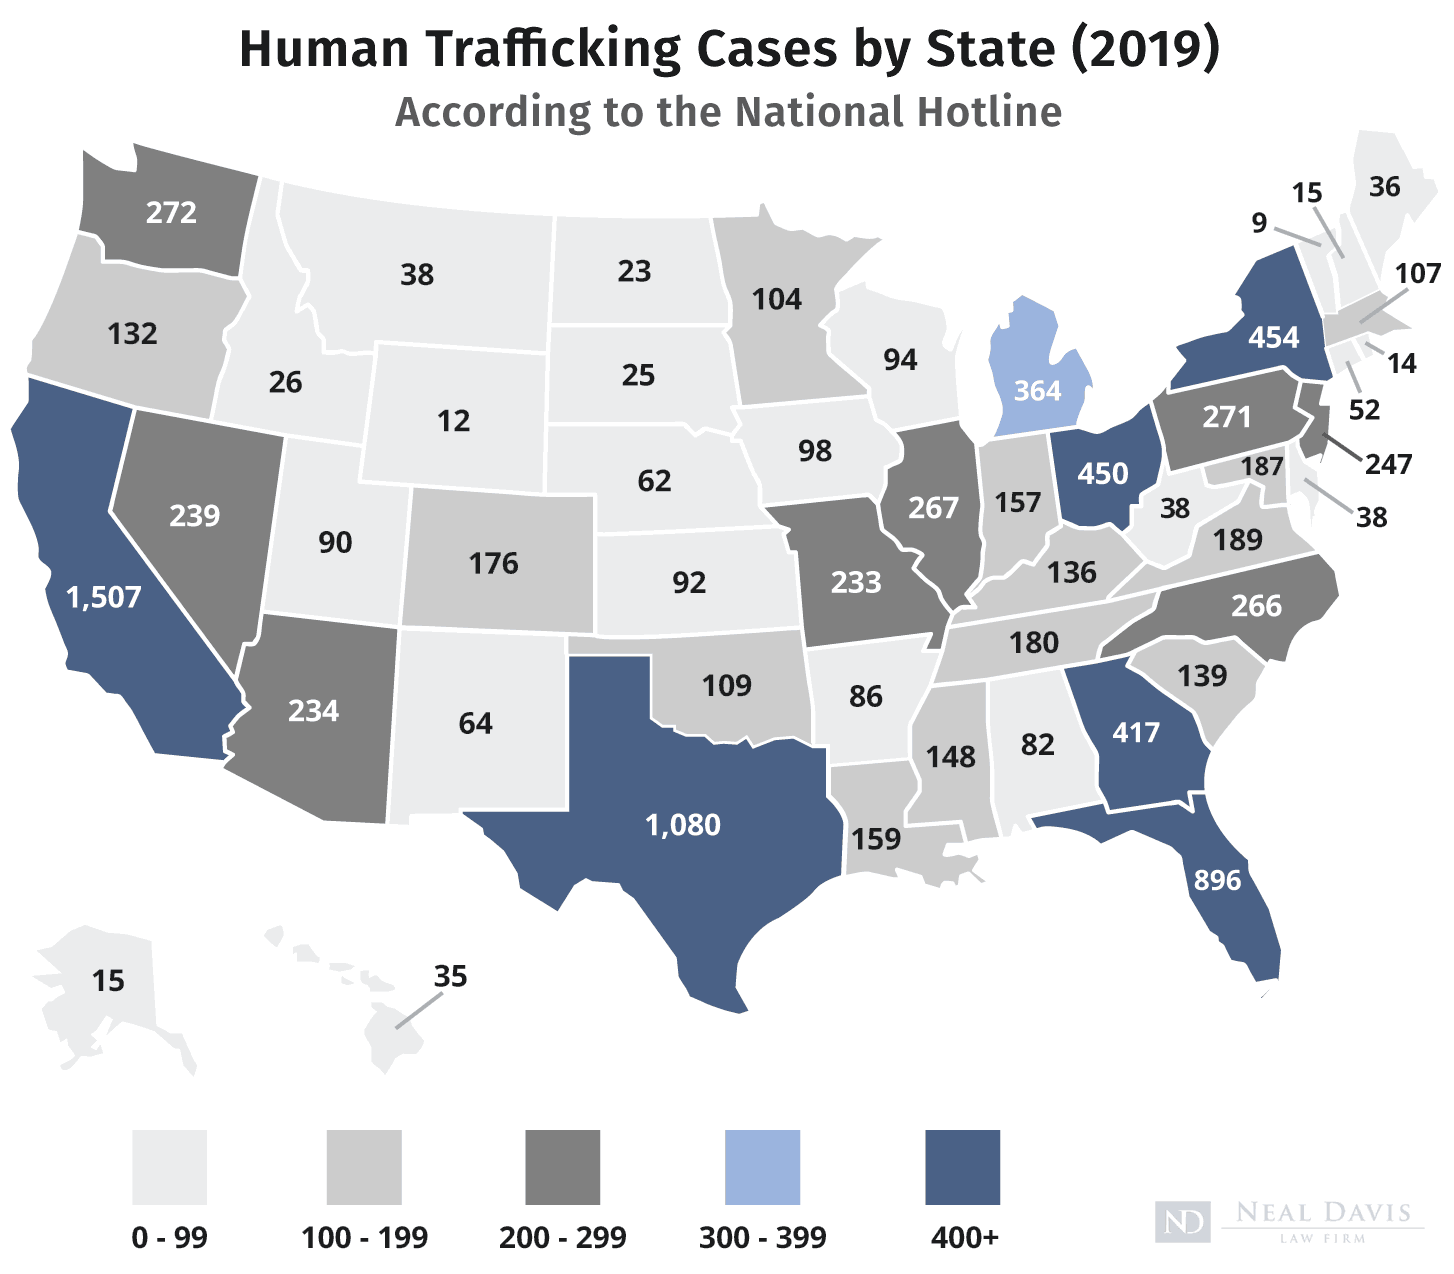 Human Trafficking Cases by State (2019)